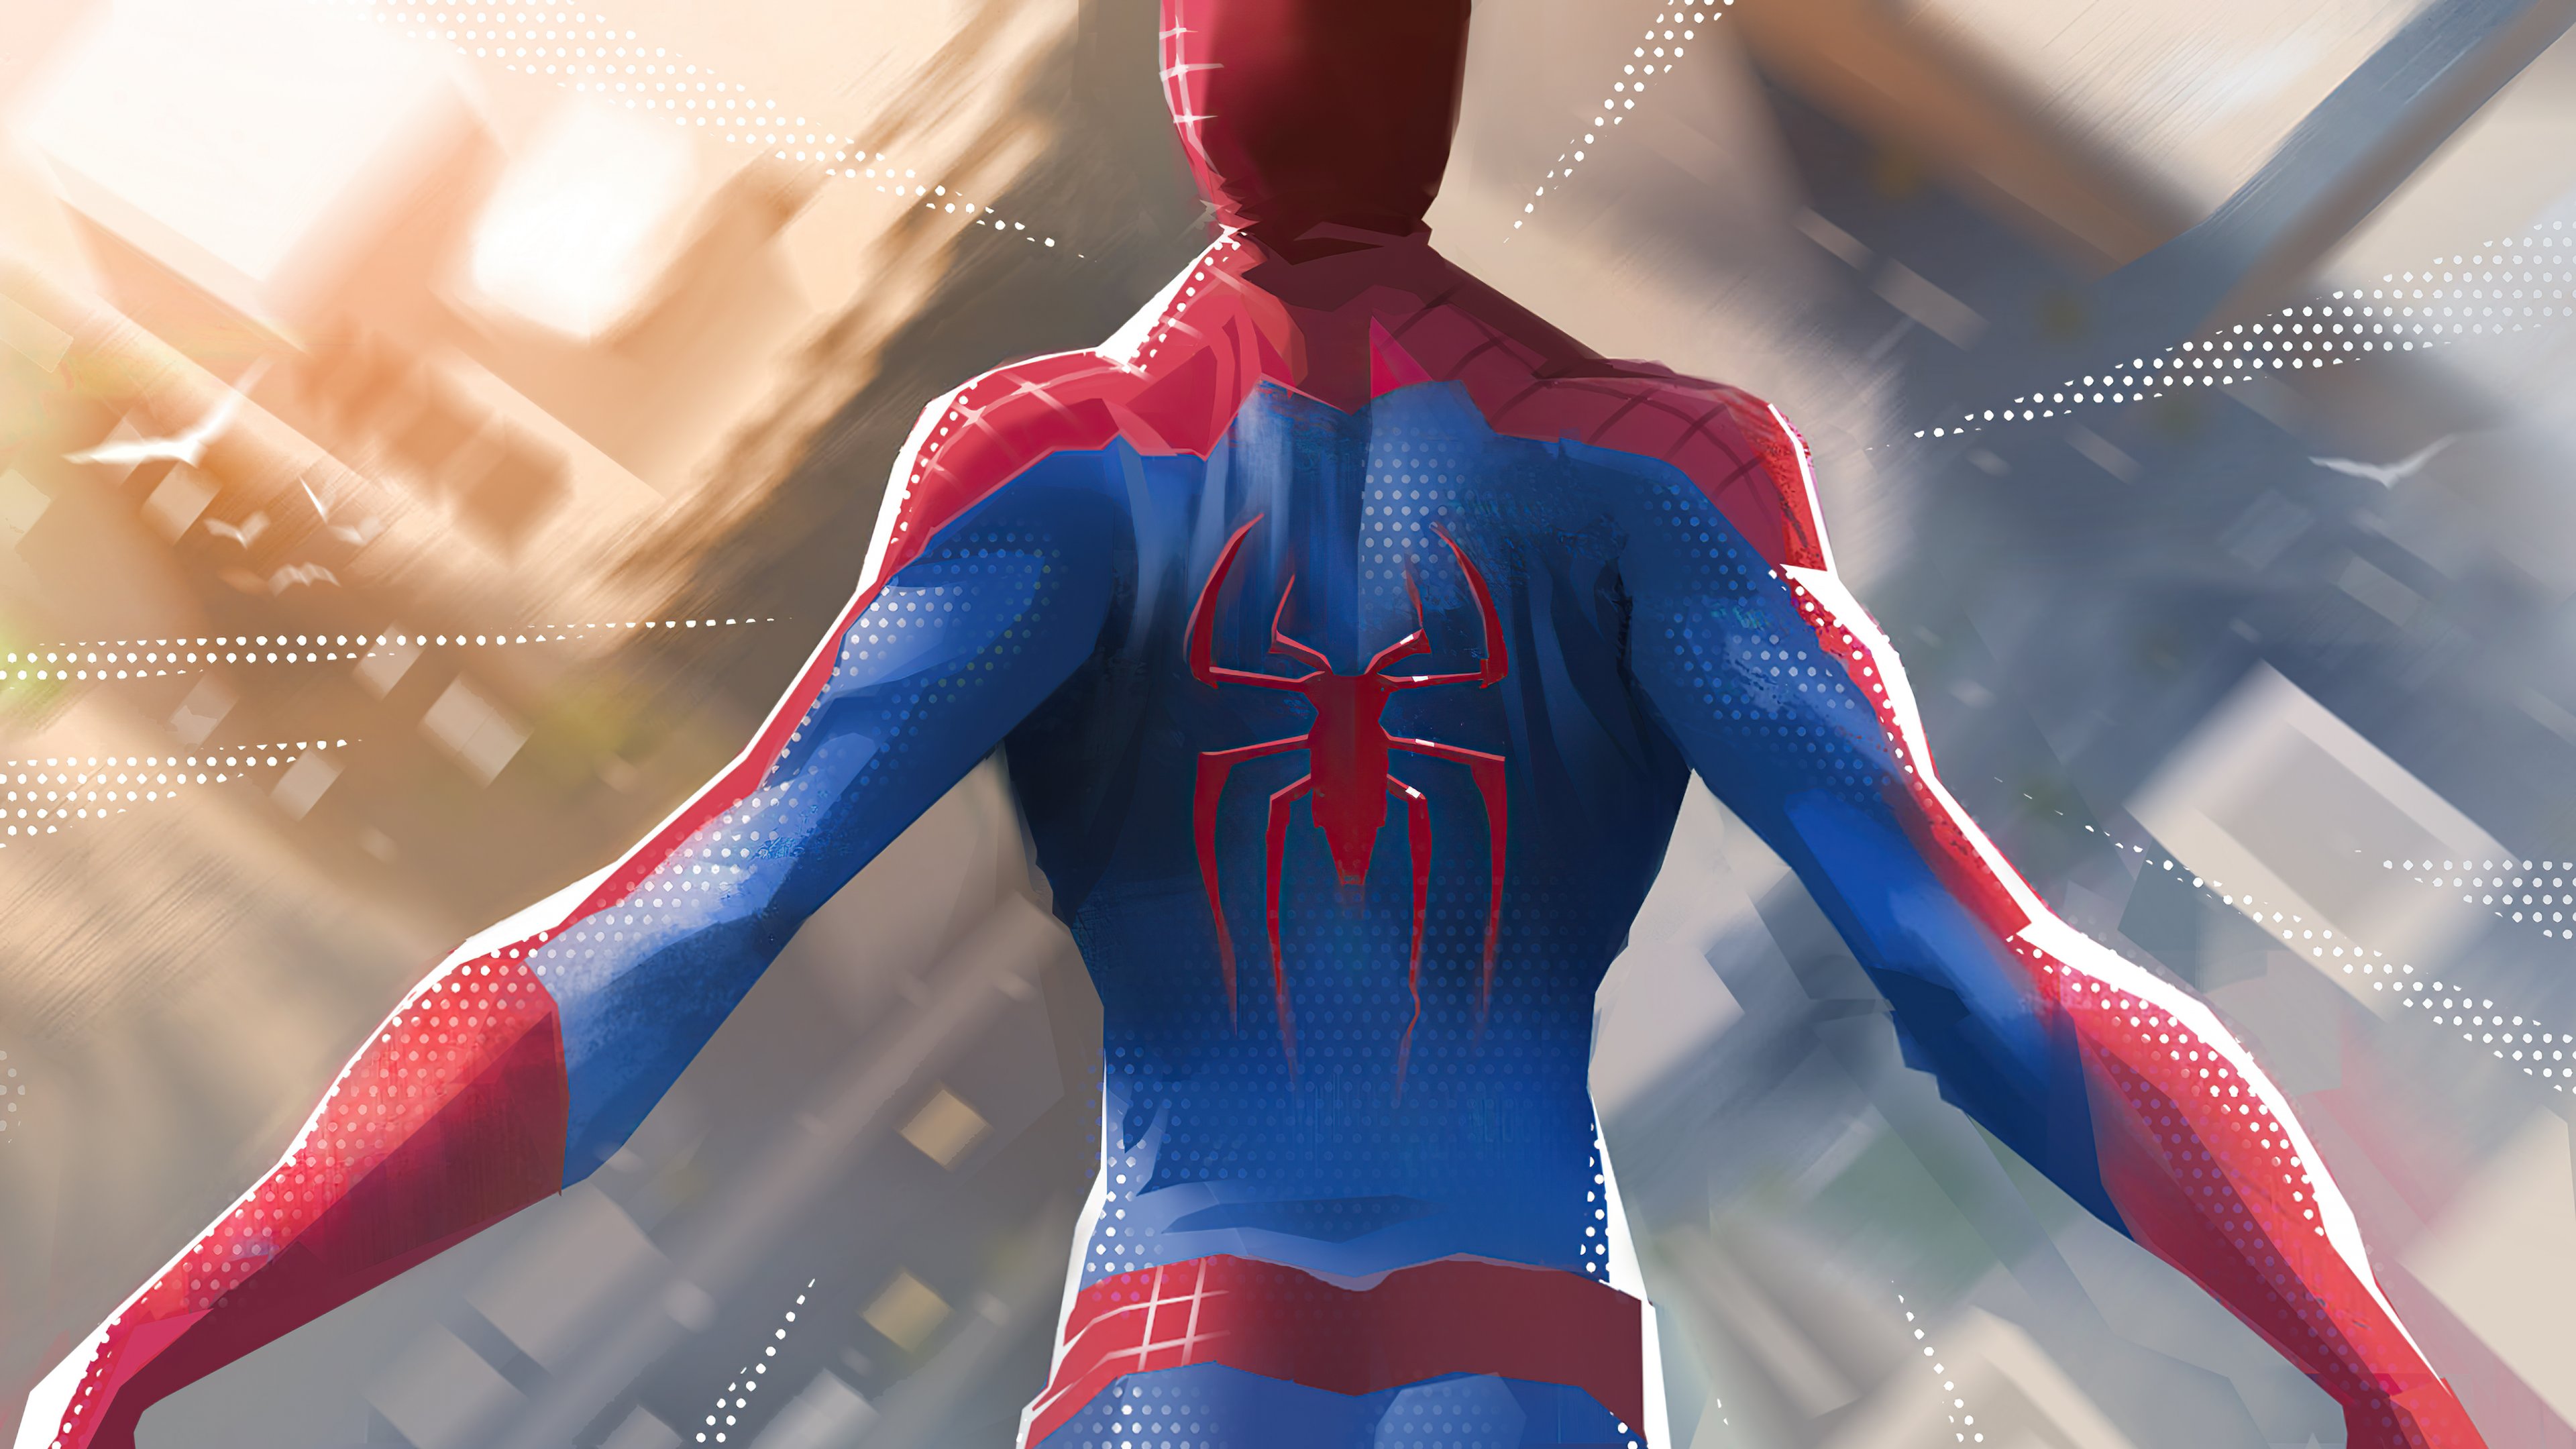 Spiderman jumping out of buildings Wallpaper 5k Ultra HD ID:7236